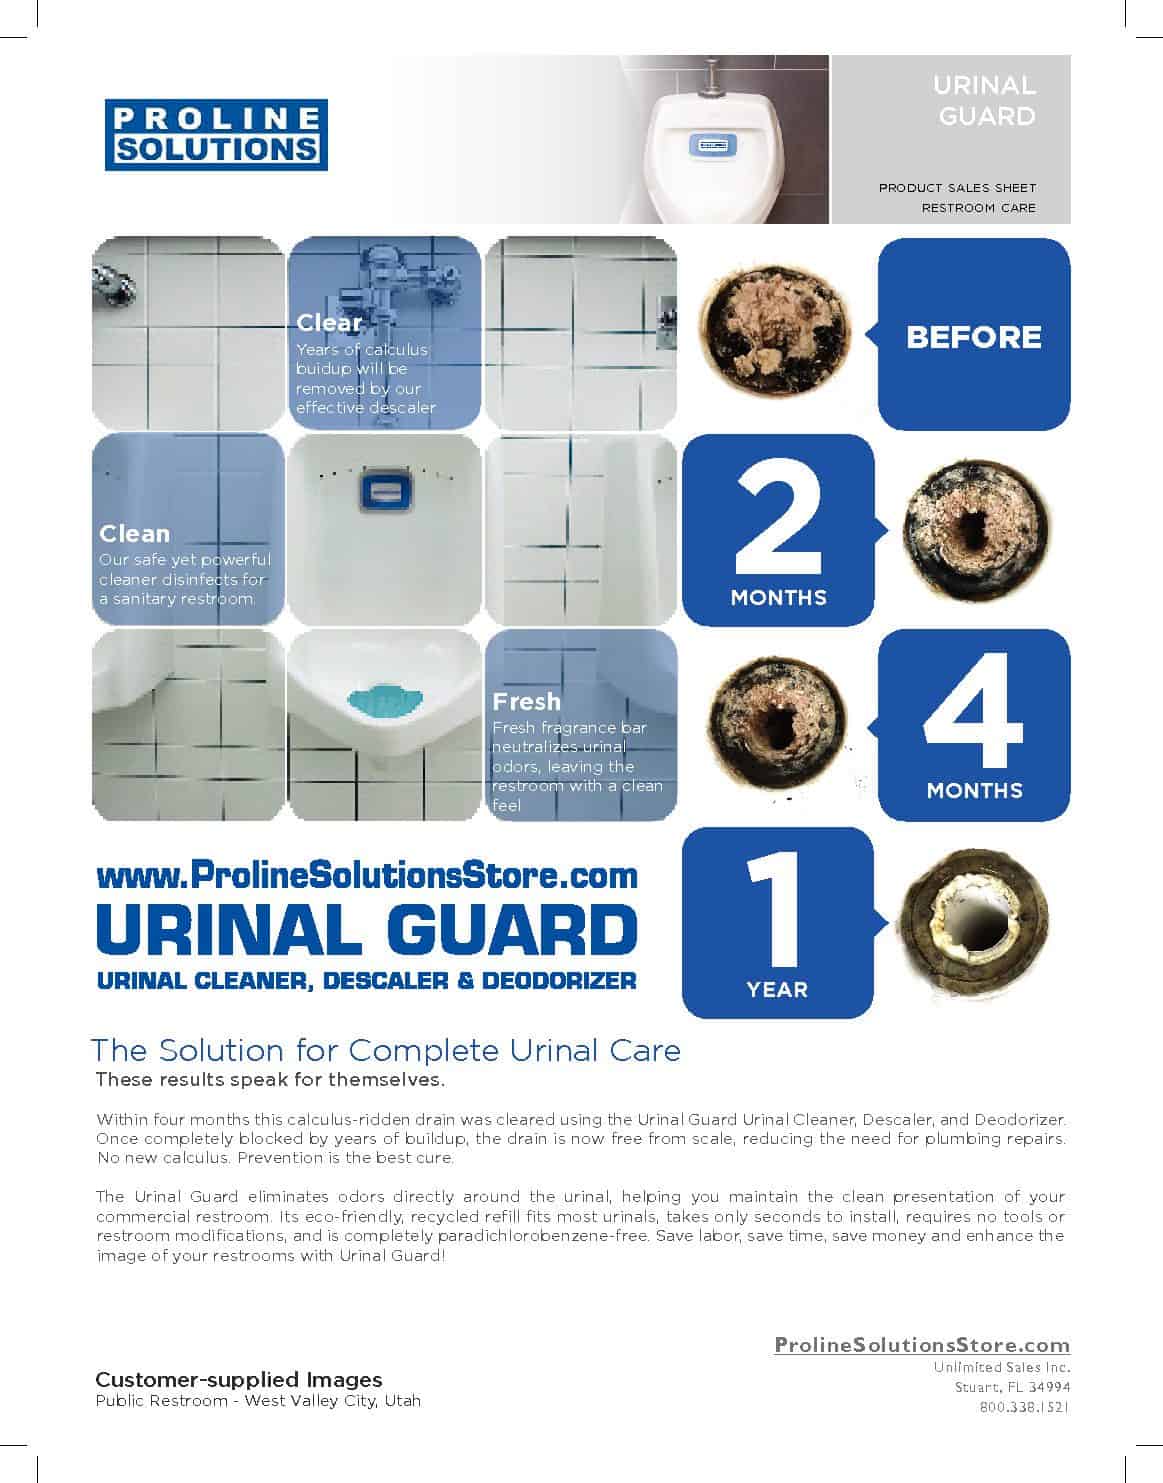 How To Keep Urinals Clean - BUNZL Cleaning & Hygiene Supplies Blog